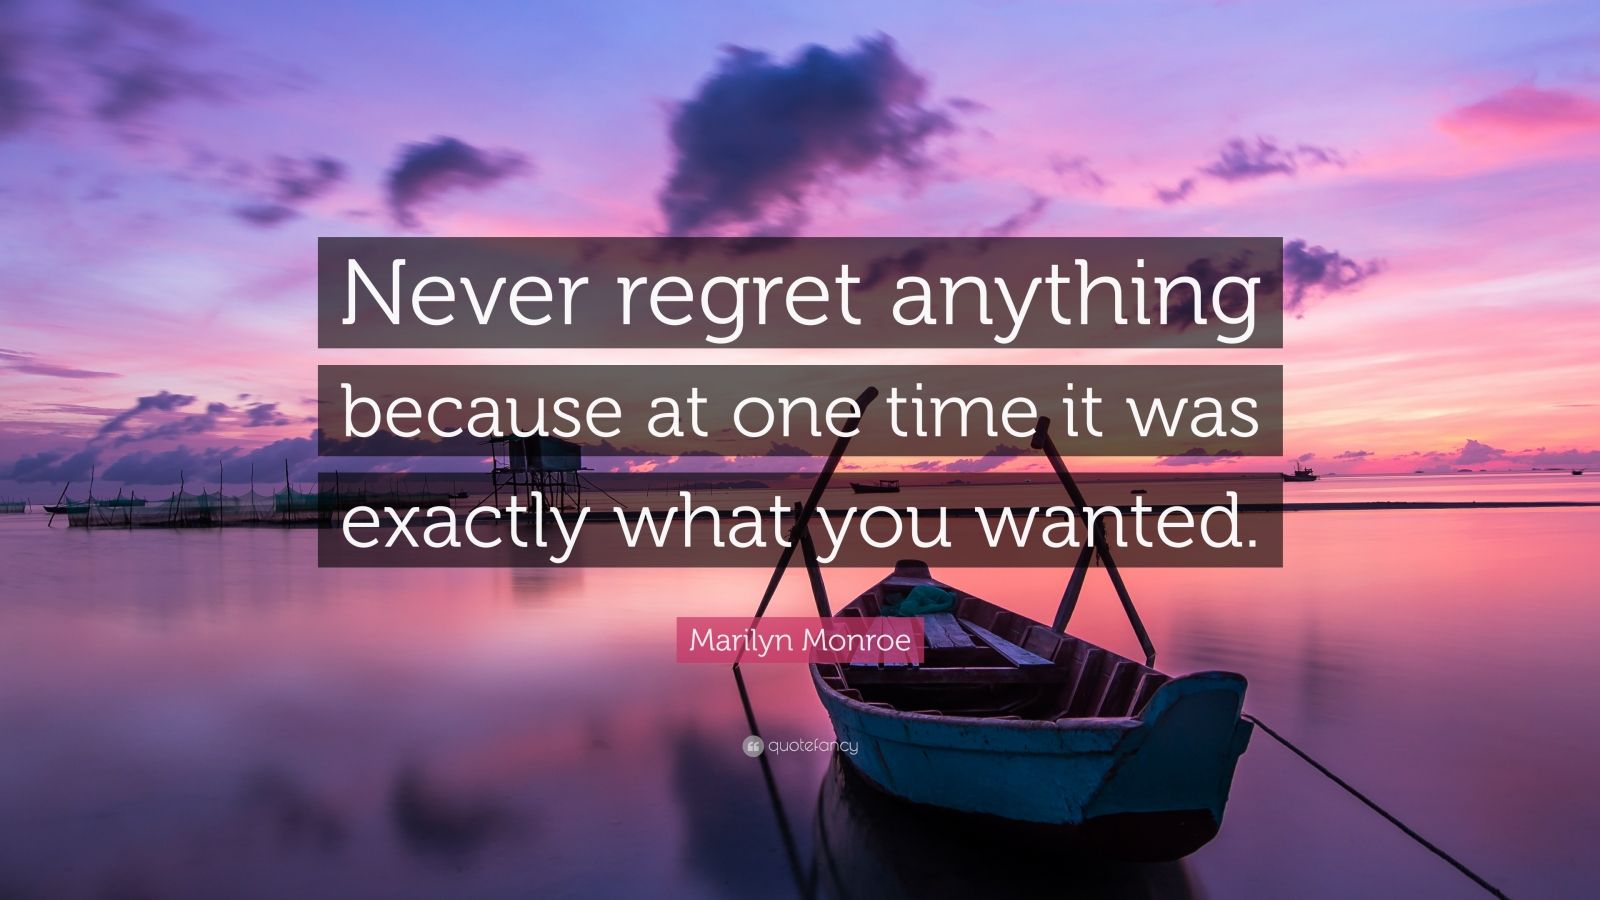 Marilyn Monroe Quote: “Never regret anything because at one time it was